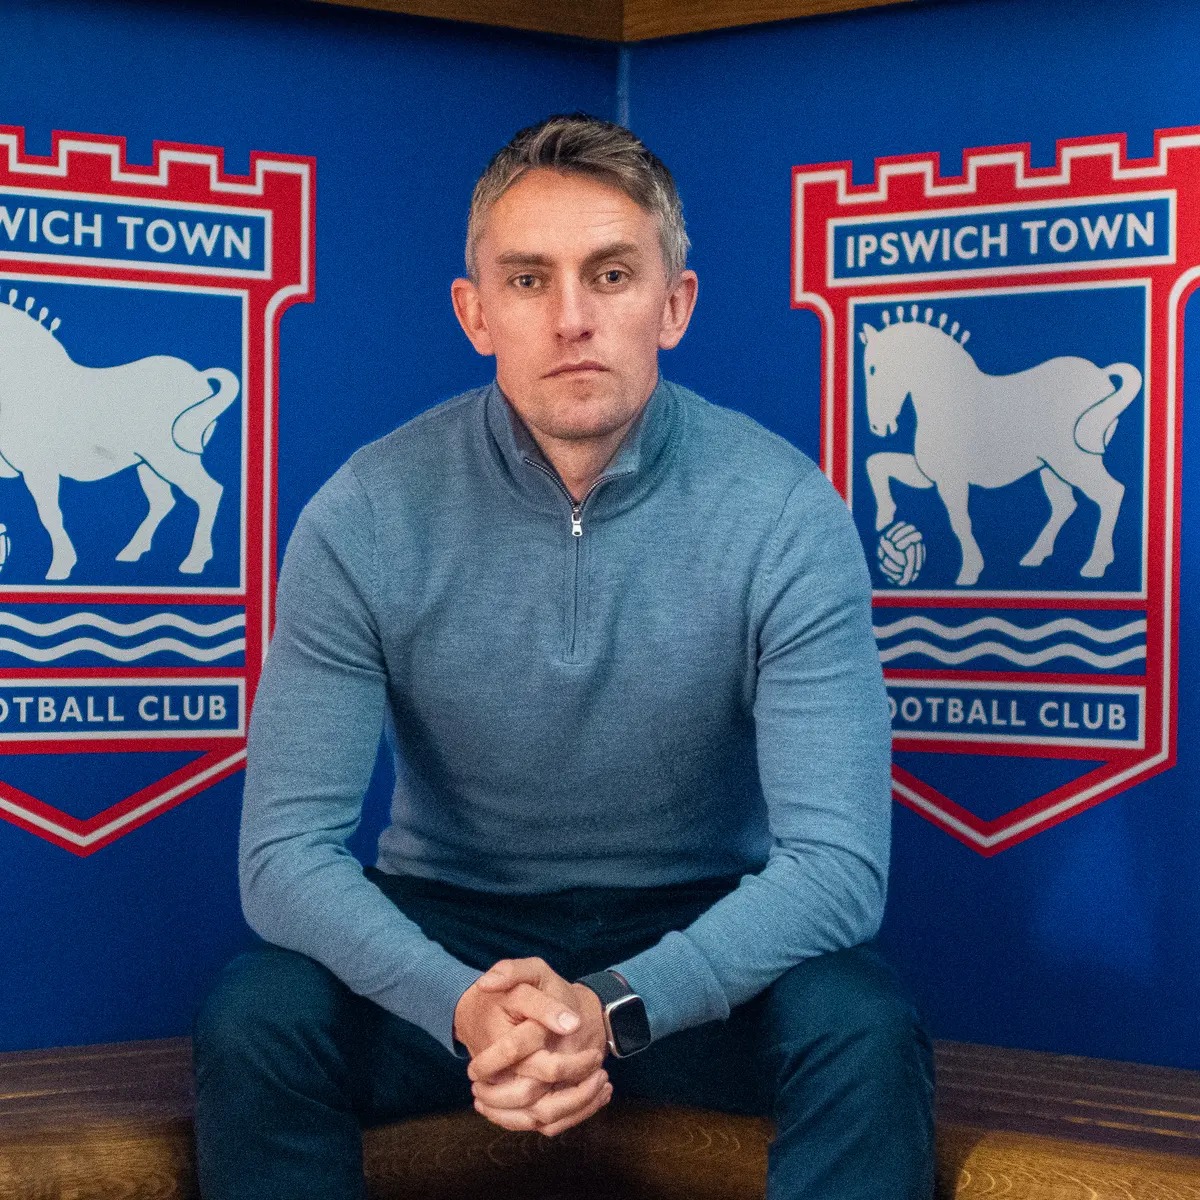 BREAKING NEWS: Kieran McKenna rejected a contract deal with Ipswich Town